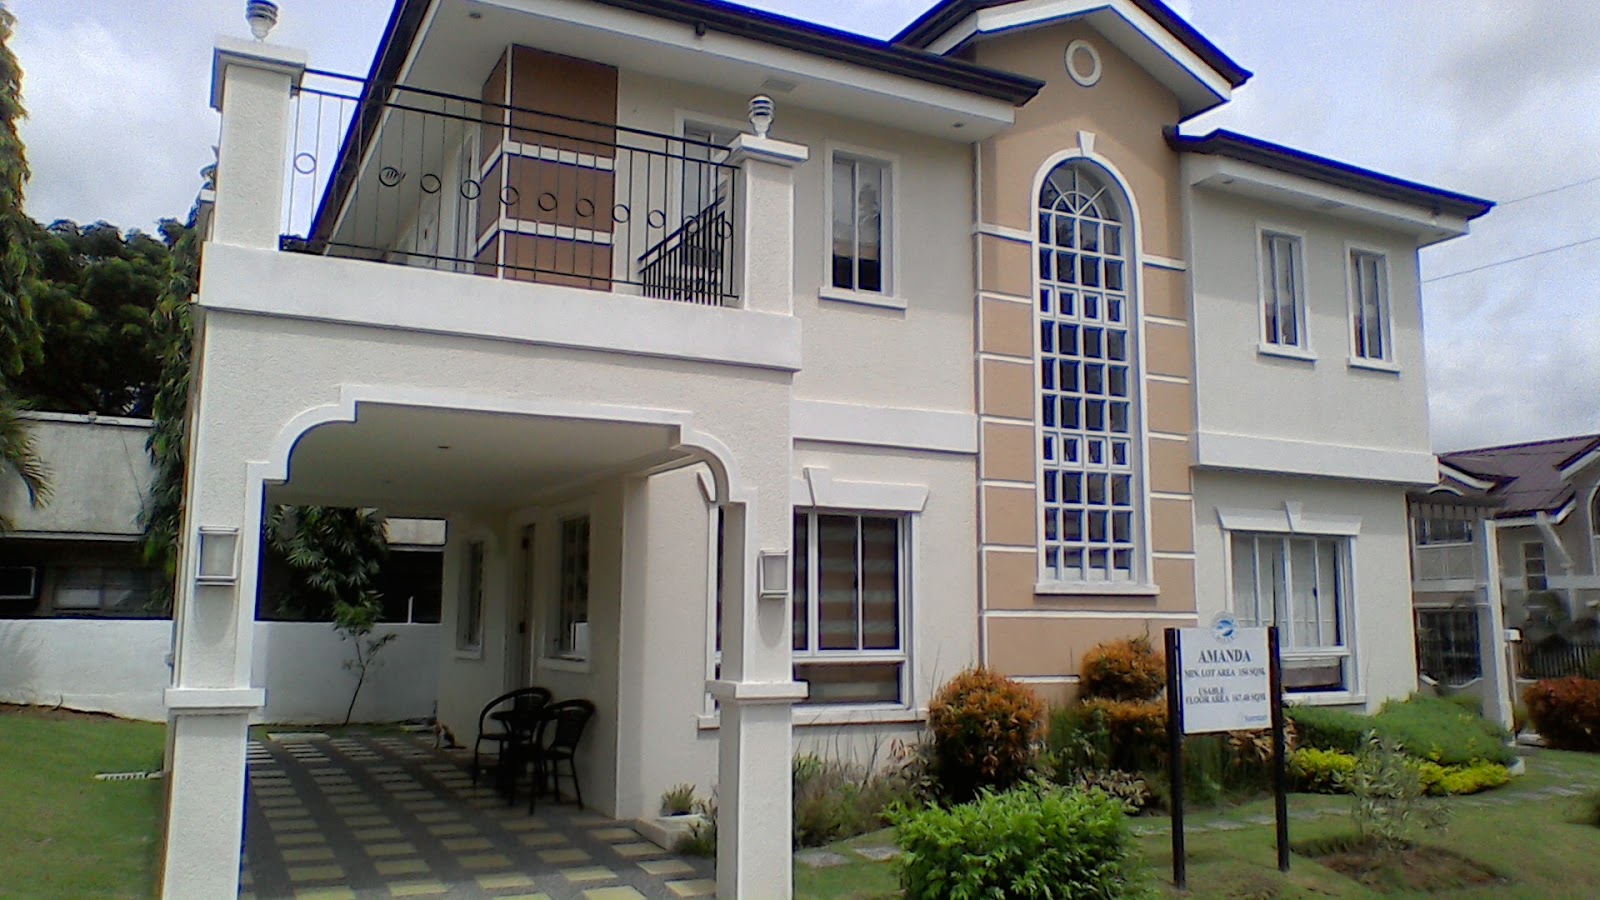 Amanda House and Lot for sale in General Trias Cavite,